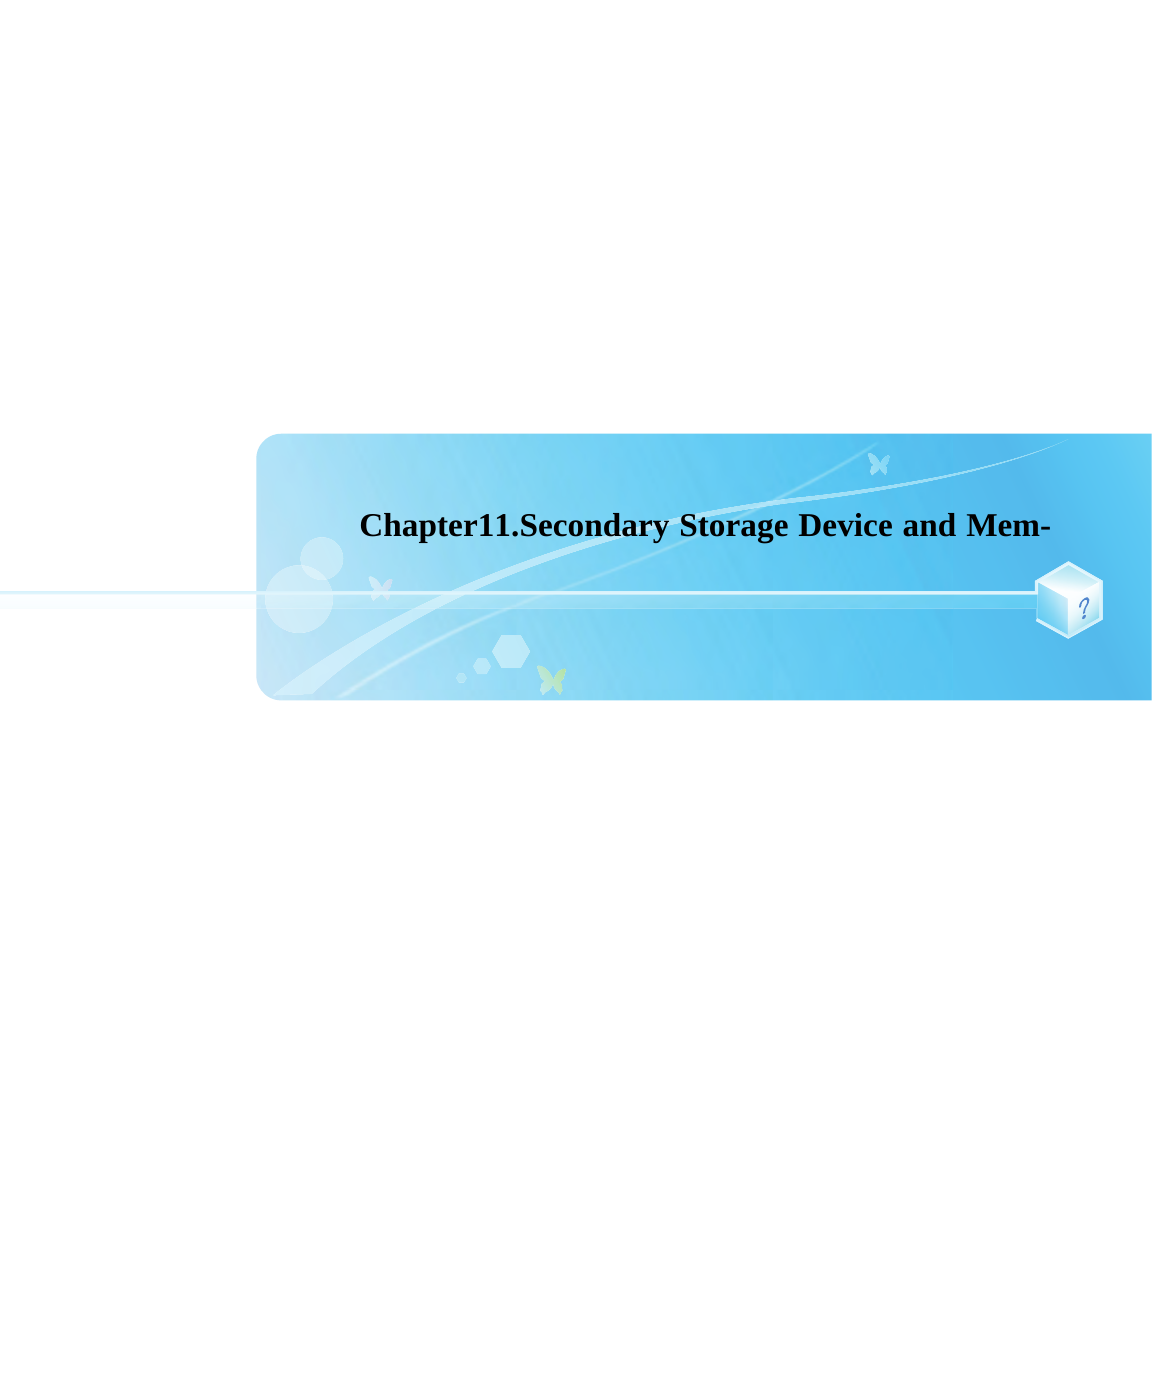 Chapter11.Secondary Storage Device and Mem-